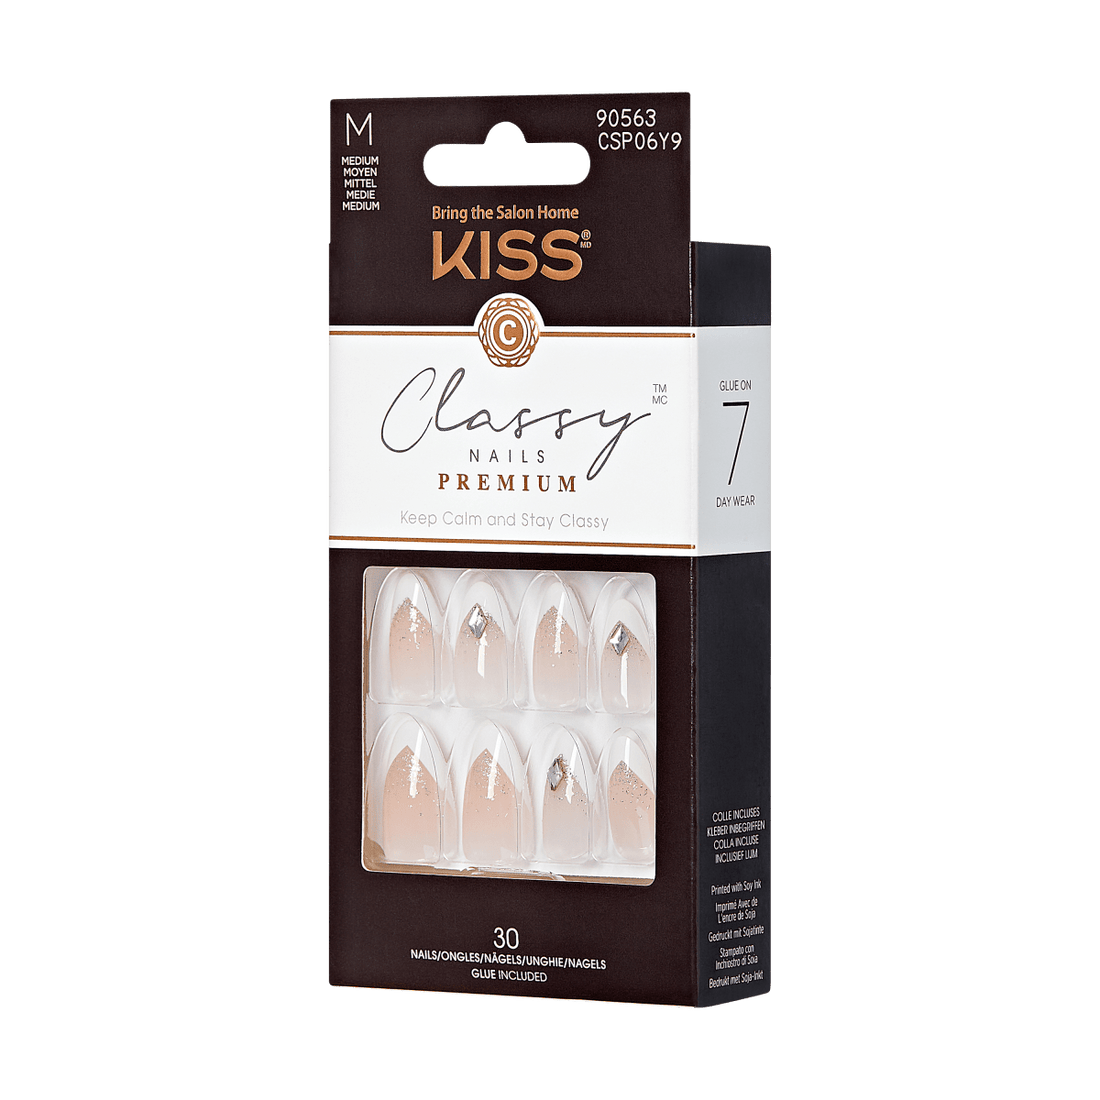 KISS Classy Nails Premium, Press-On Nails, Say Yes, White, Med Almond, 30ct